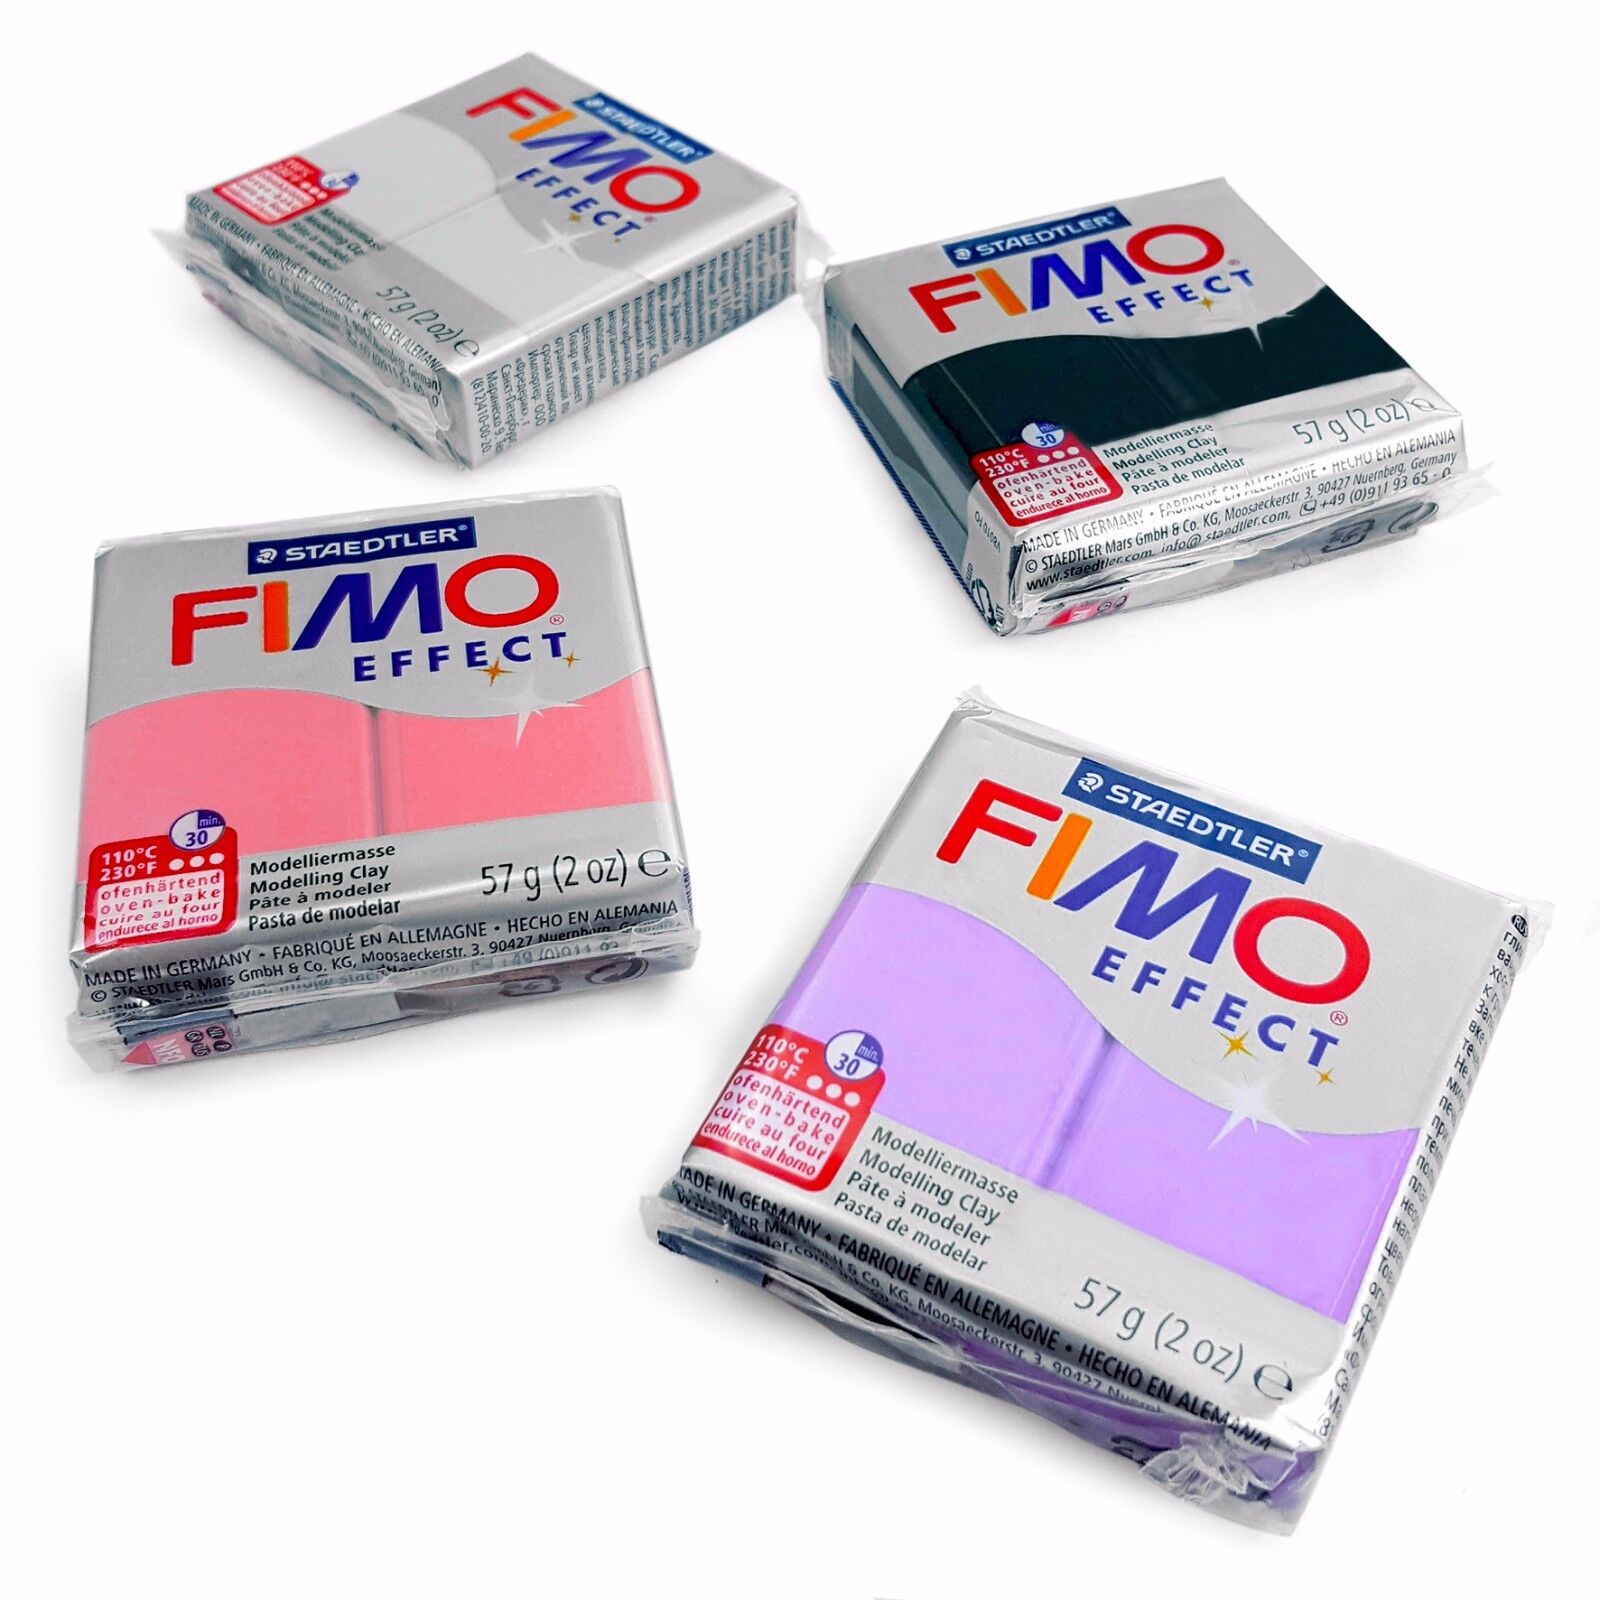 FIMO Effect Polymer Oven Modelling Clay - 57g - Set of 4 - Pearl Finish